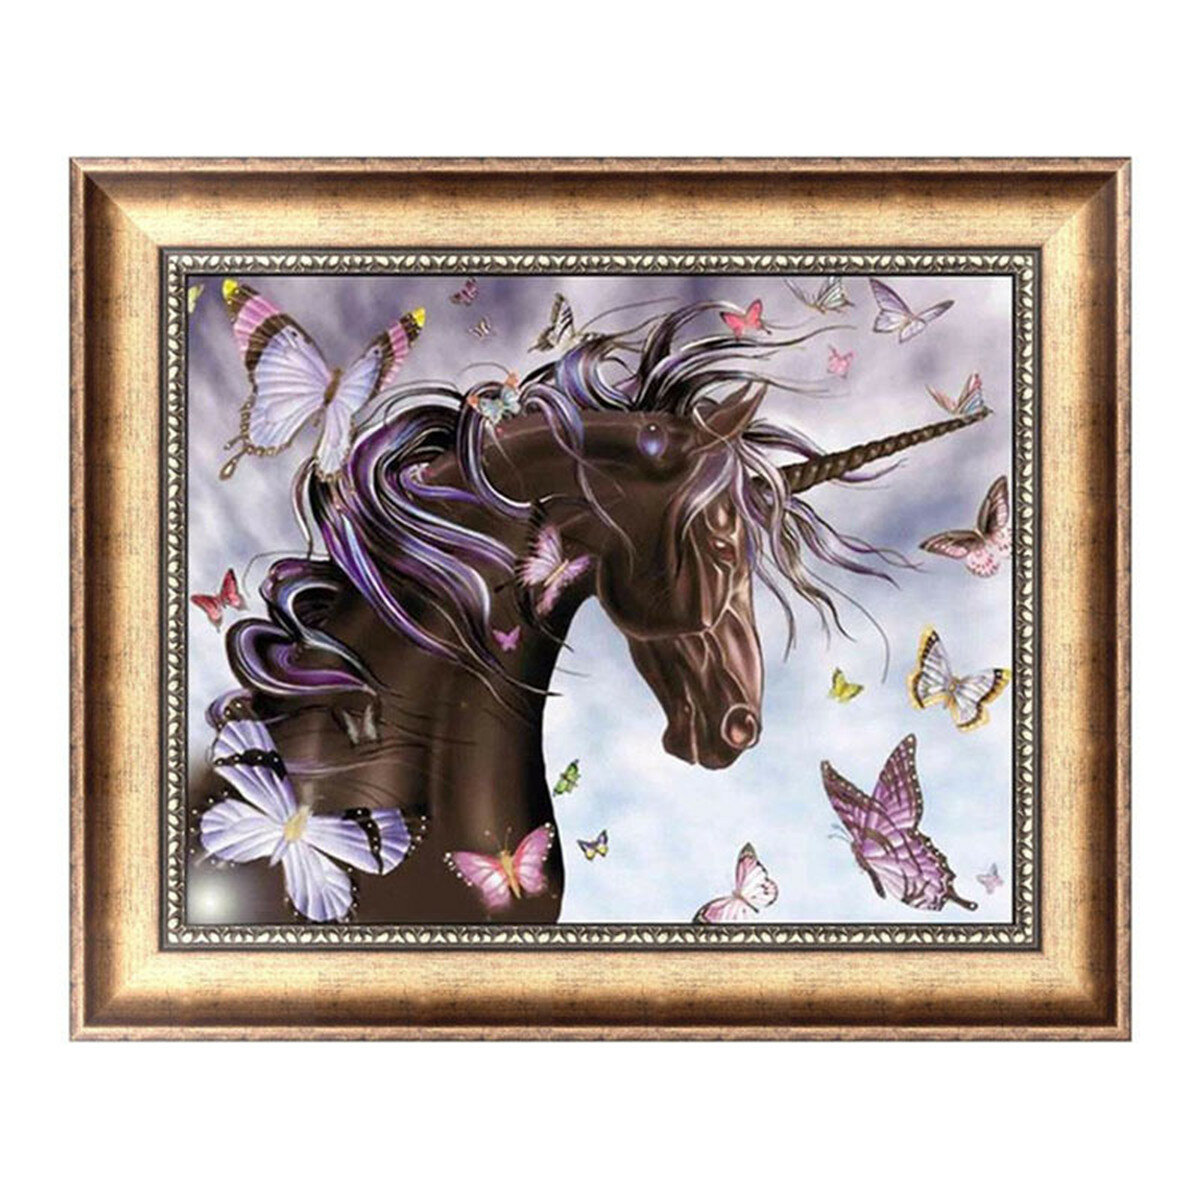 Horse Butterfly 5D Diamond Embroidery Painting Cross Stitch DIY Painting Tools Handmade Wall Decorations Gifts 30*40cm